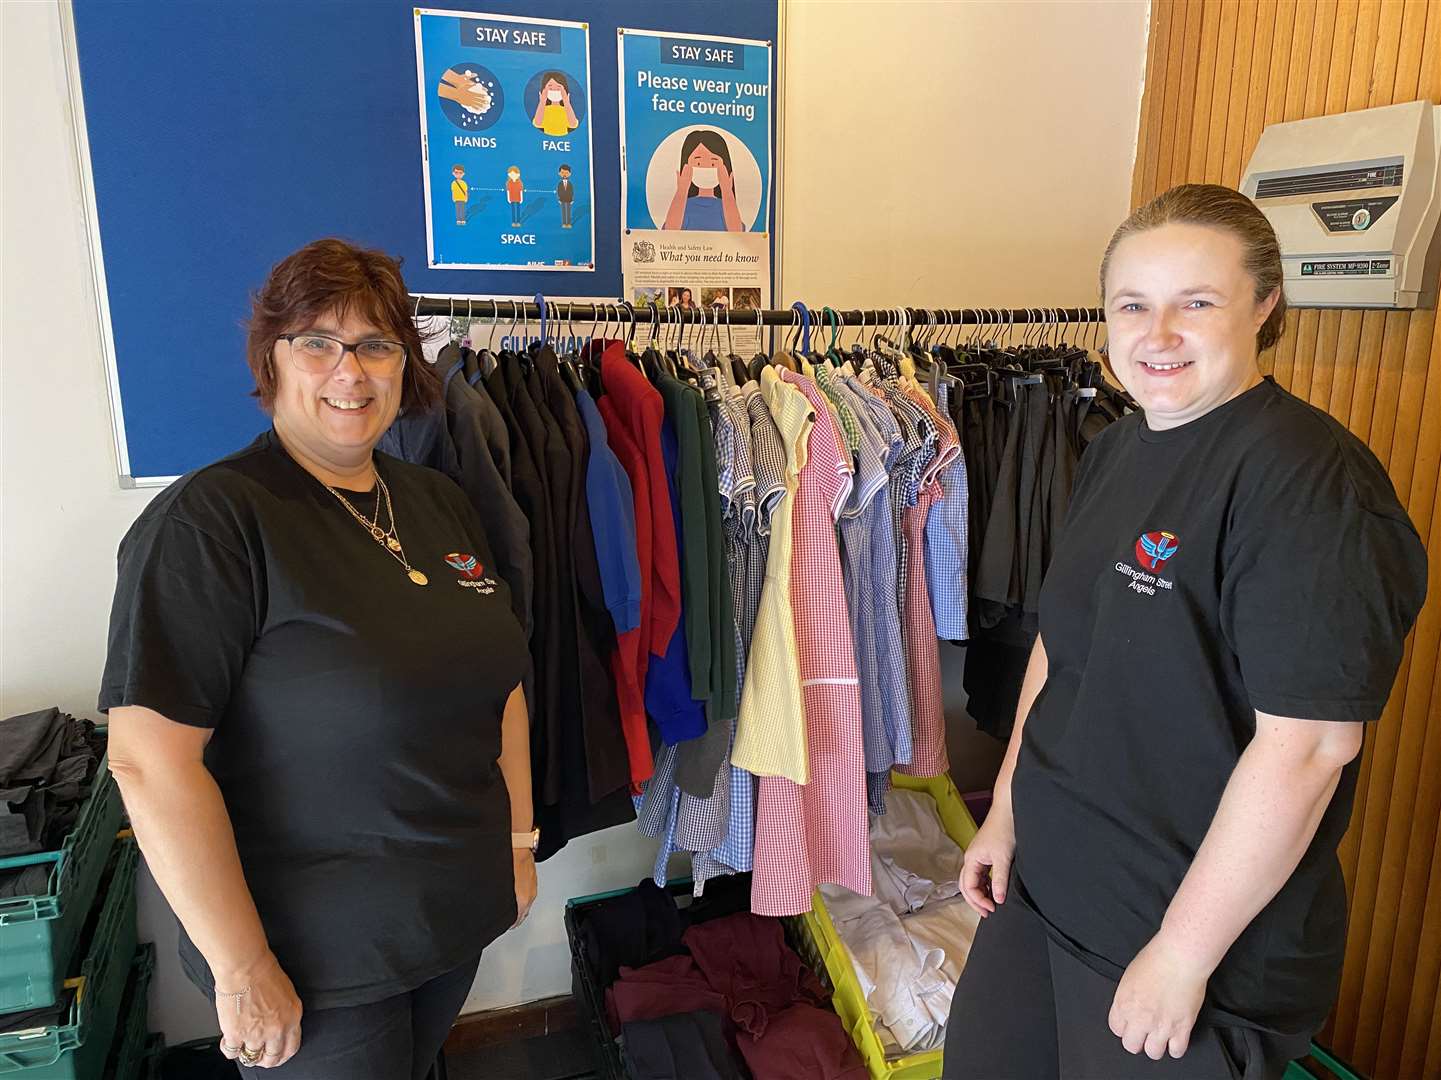 Gina Carpenter and Kylie Davies volunteer at the Gillingham Street Angels and helped set up the initiative